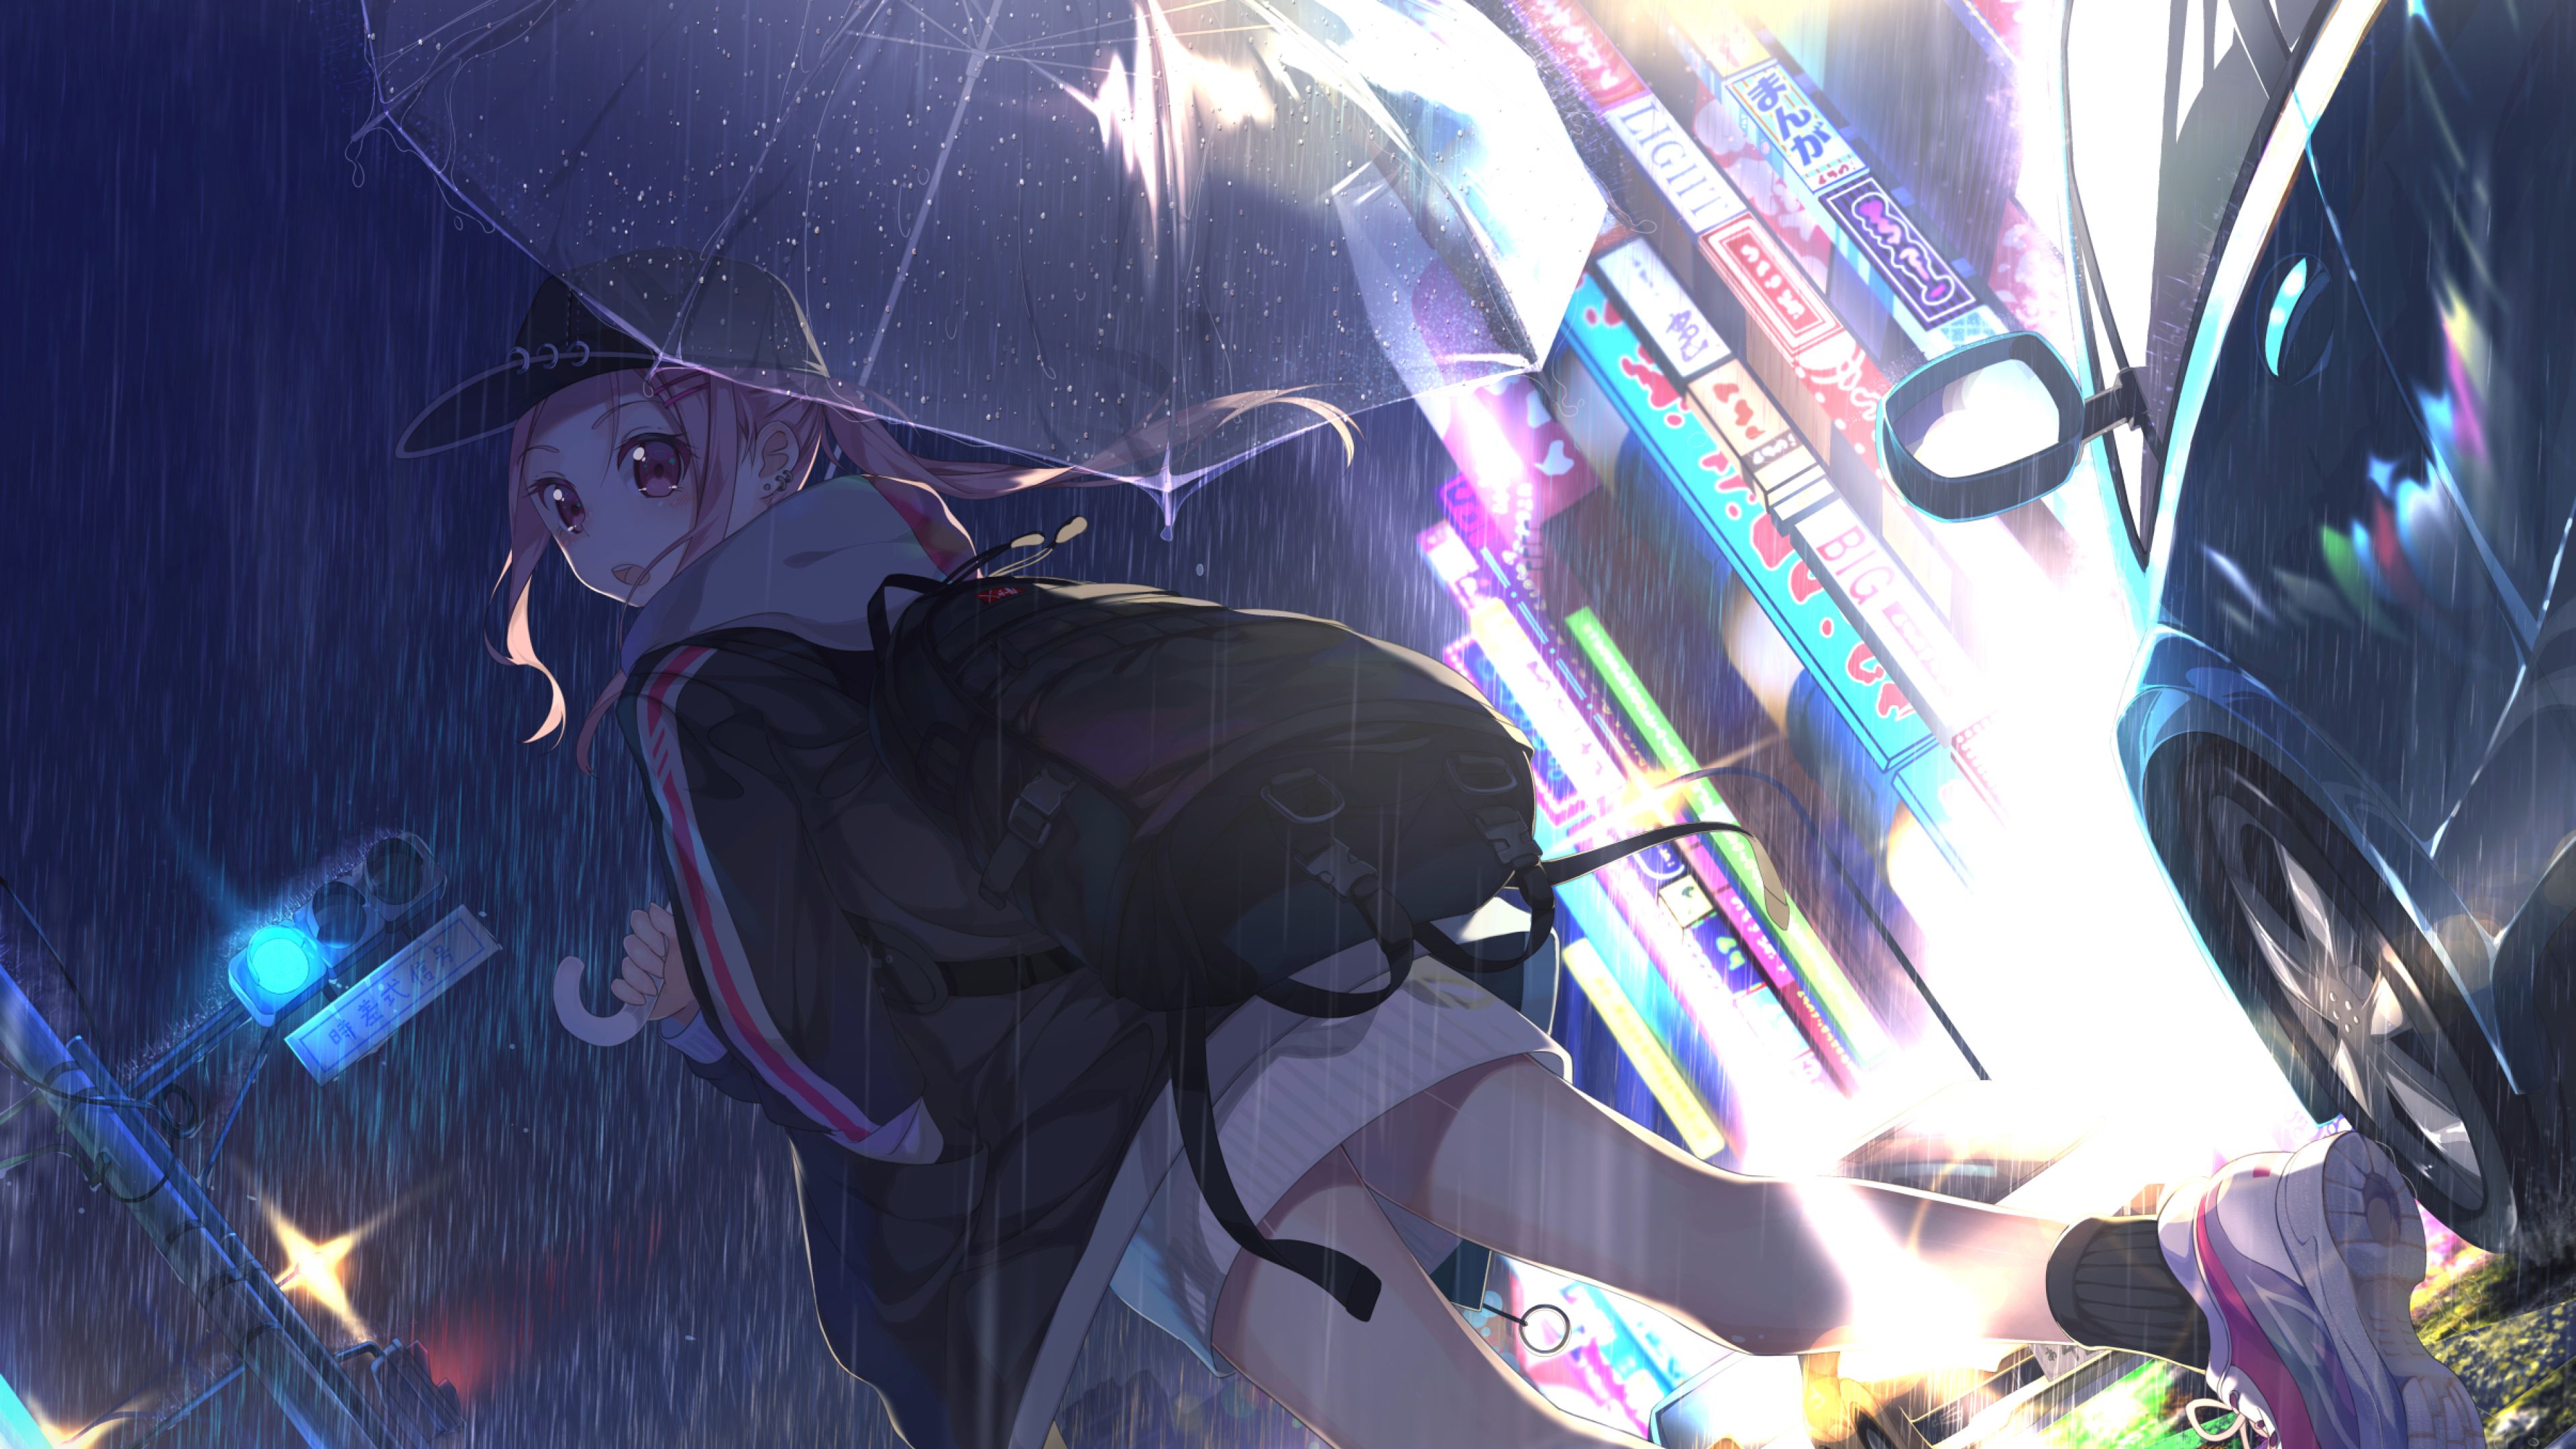 Anime Girl with Umbrella In Rain 4K Wallpaper, HD Anime 4K Wallpaper, Image, Photo and Background